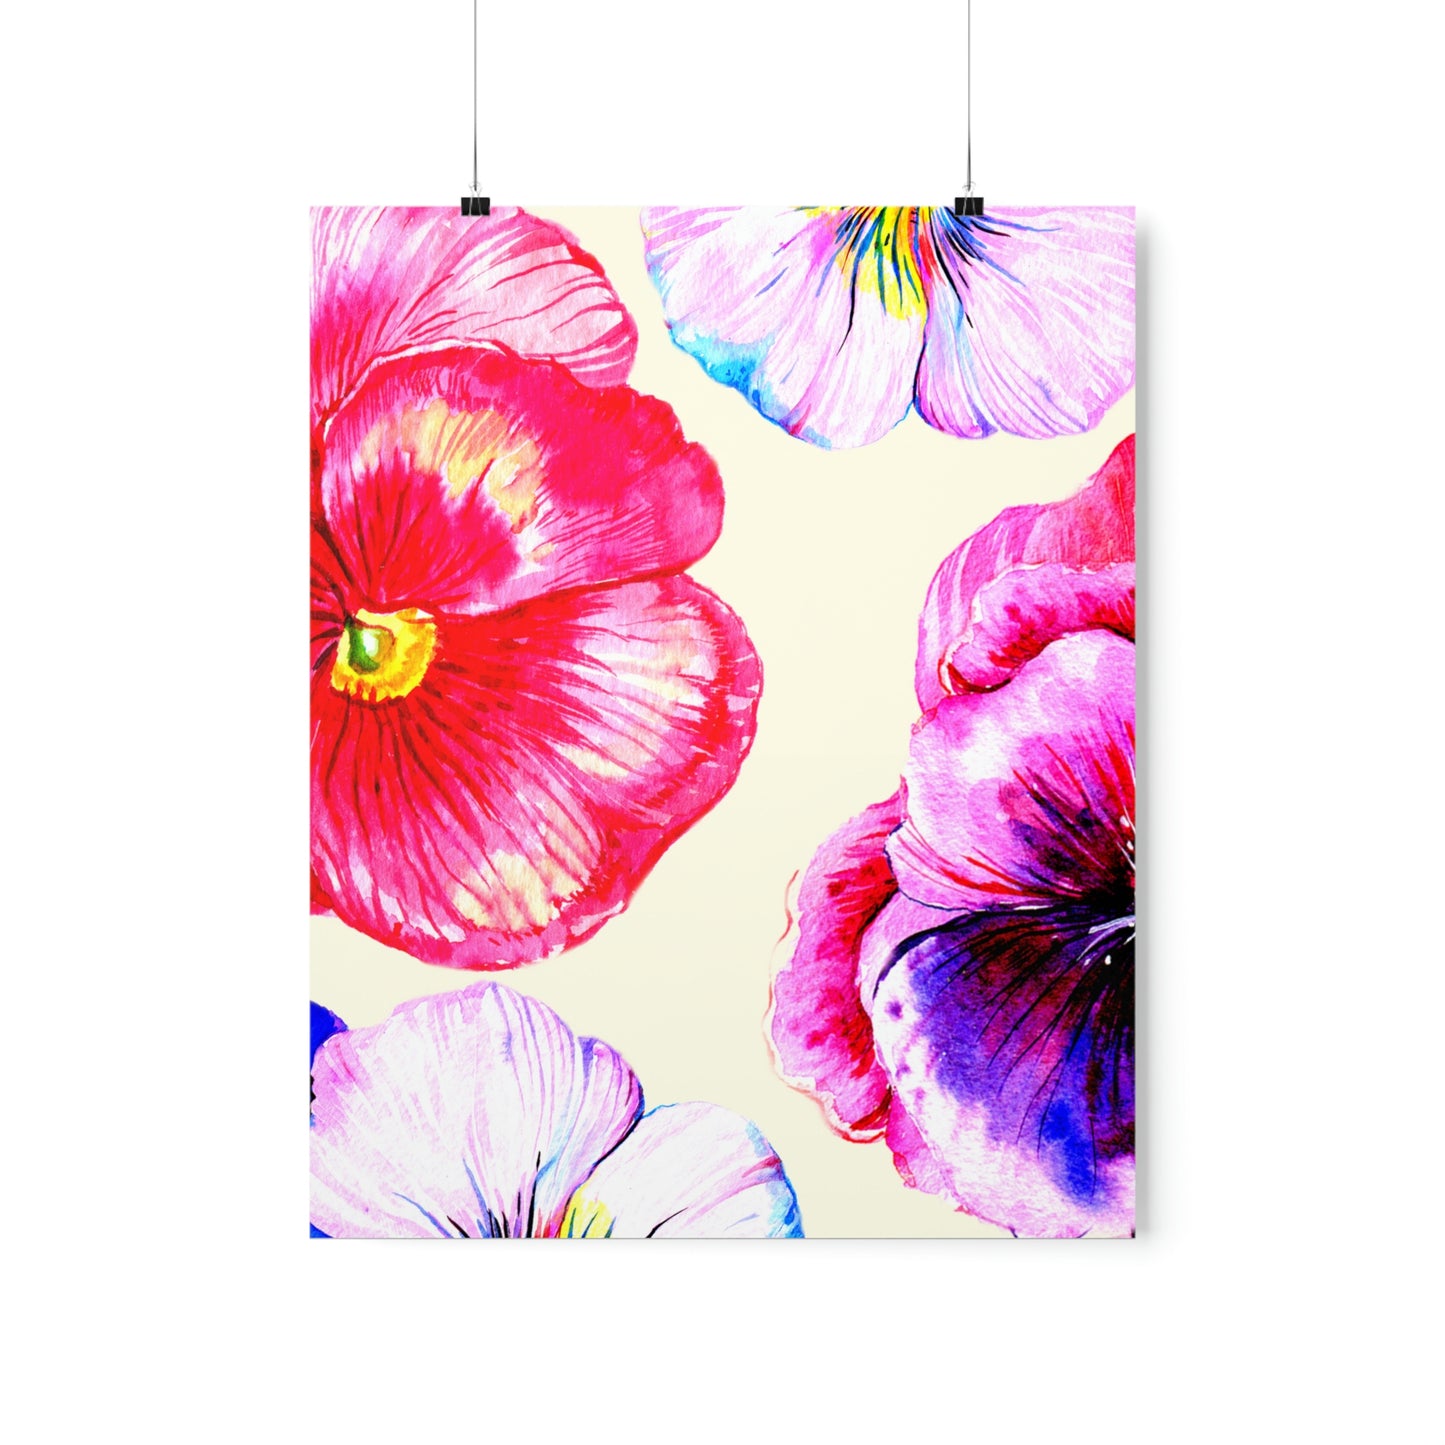 Vibrant Floral Poster